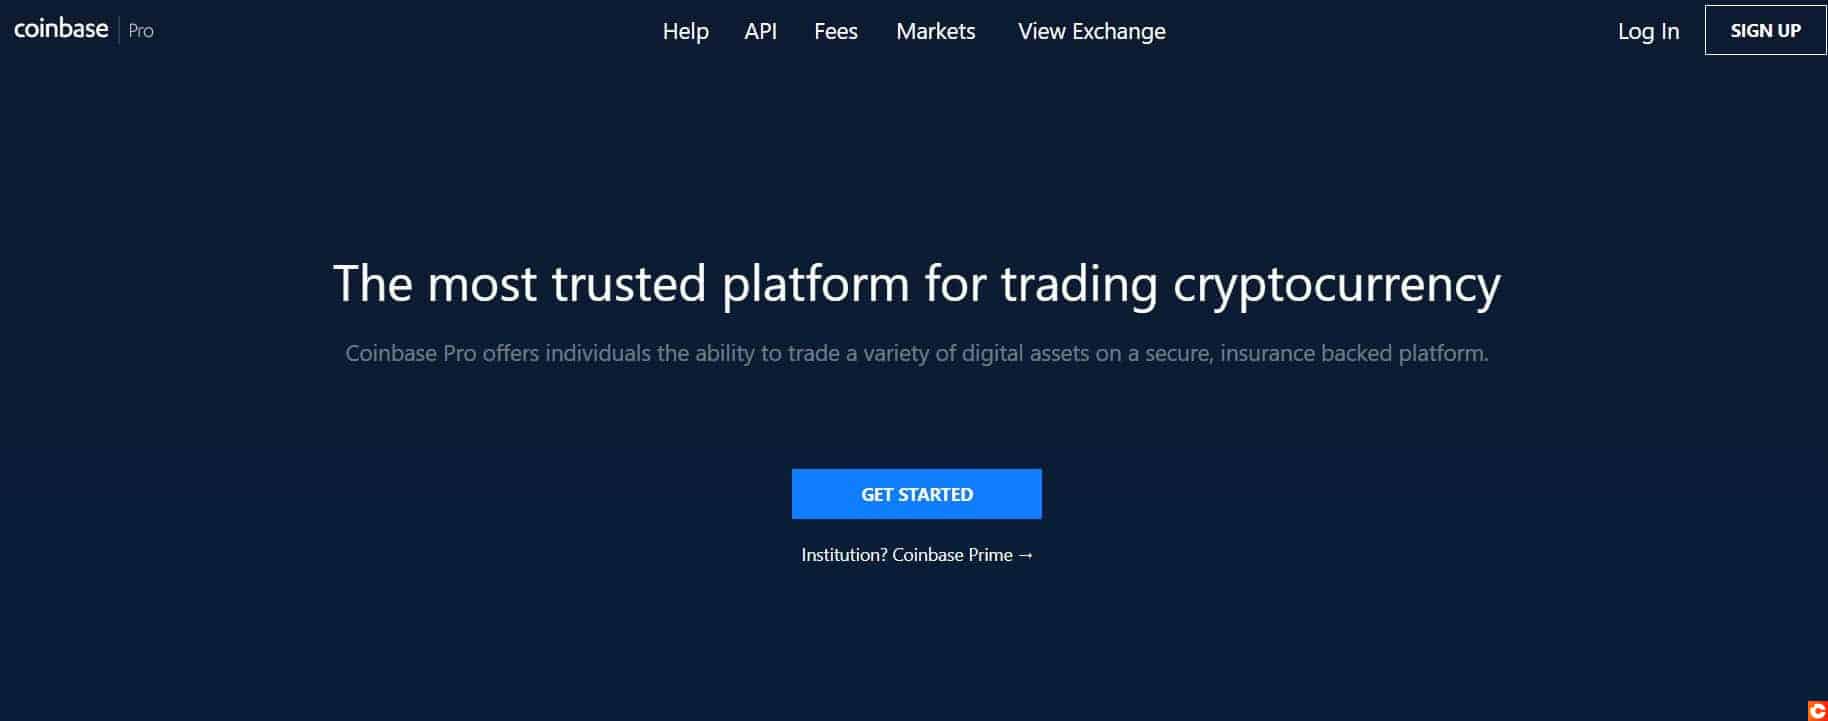 Coinbase Pro, for more flexible cryptocurrency purchases